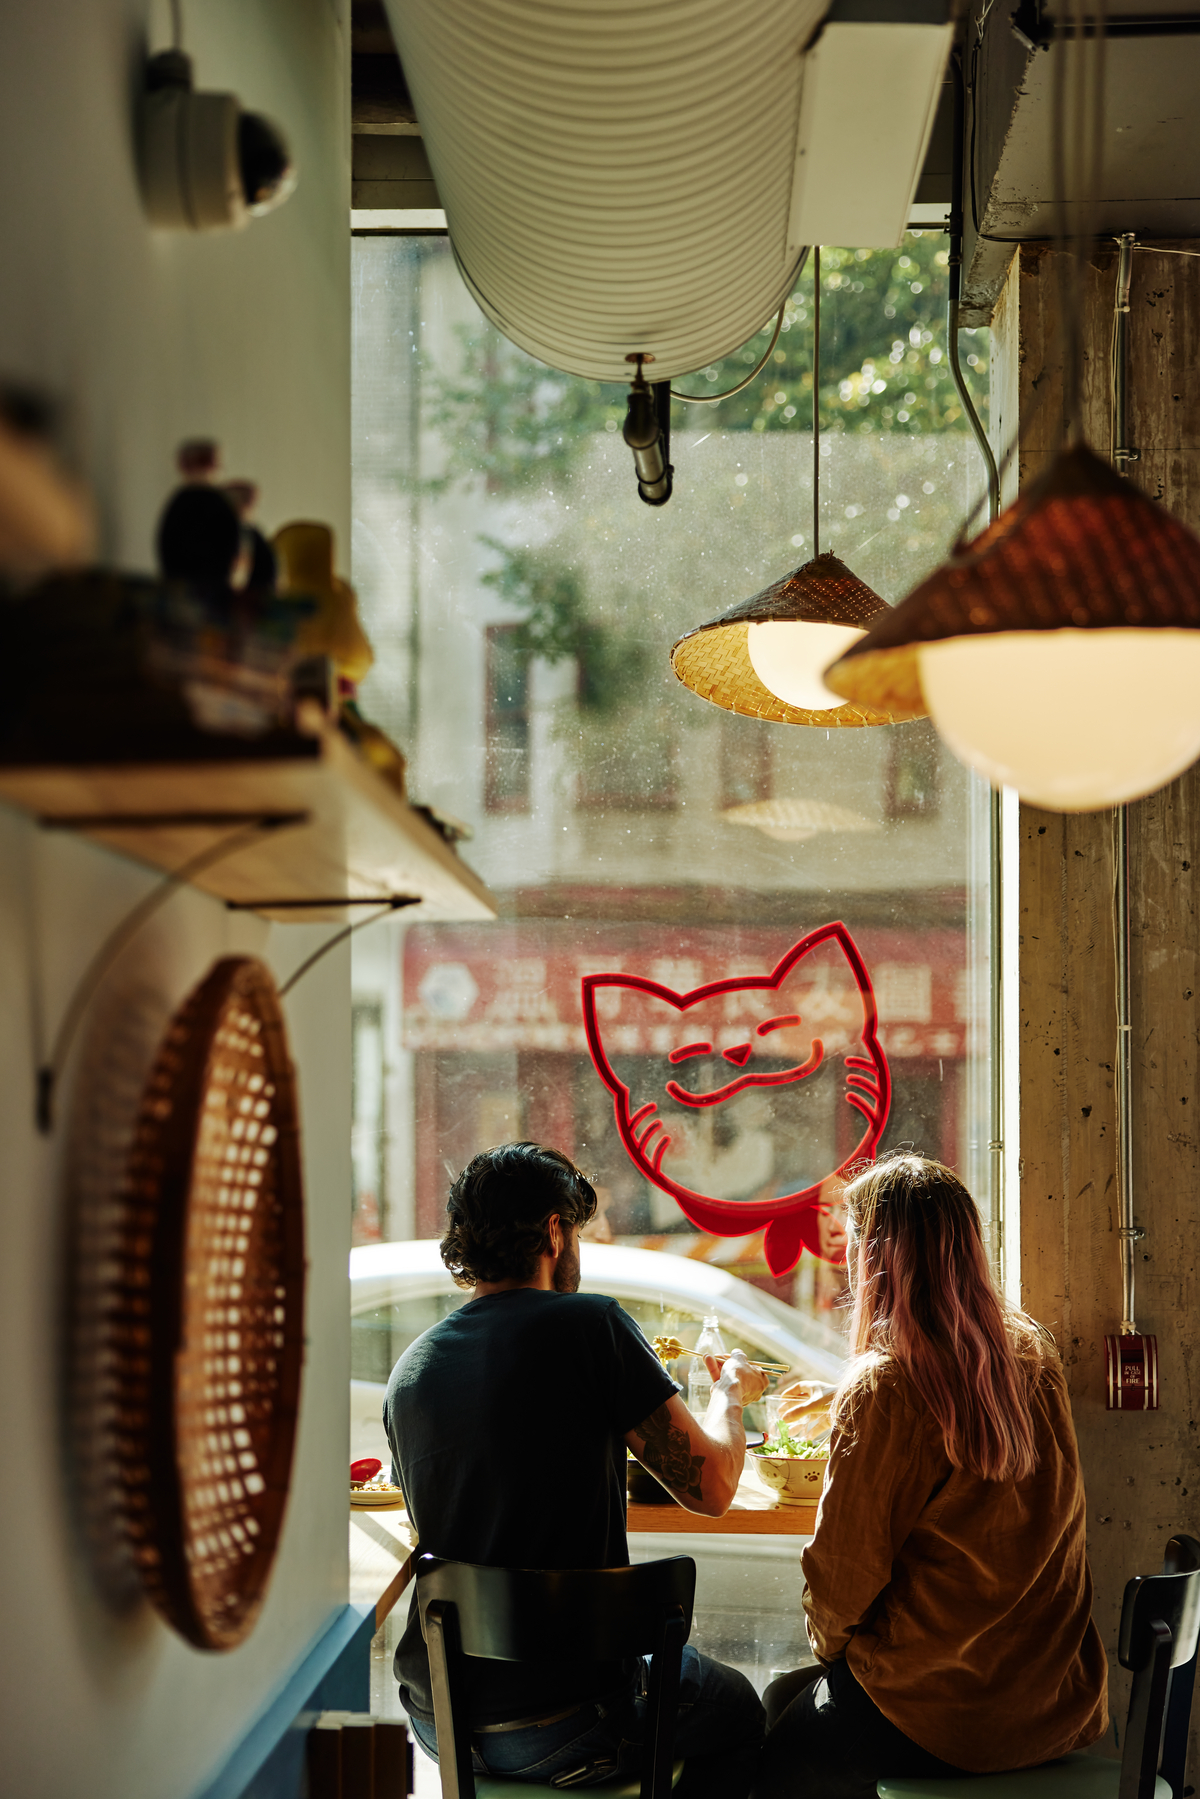 Two people sit together facing a window at Fat Mao Noodles in Chinatown. They are sitting on barstools at a window ledge and a red cat is outlined on the window.